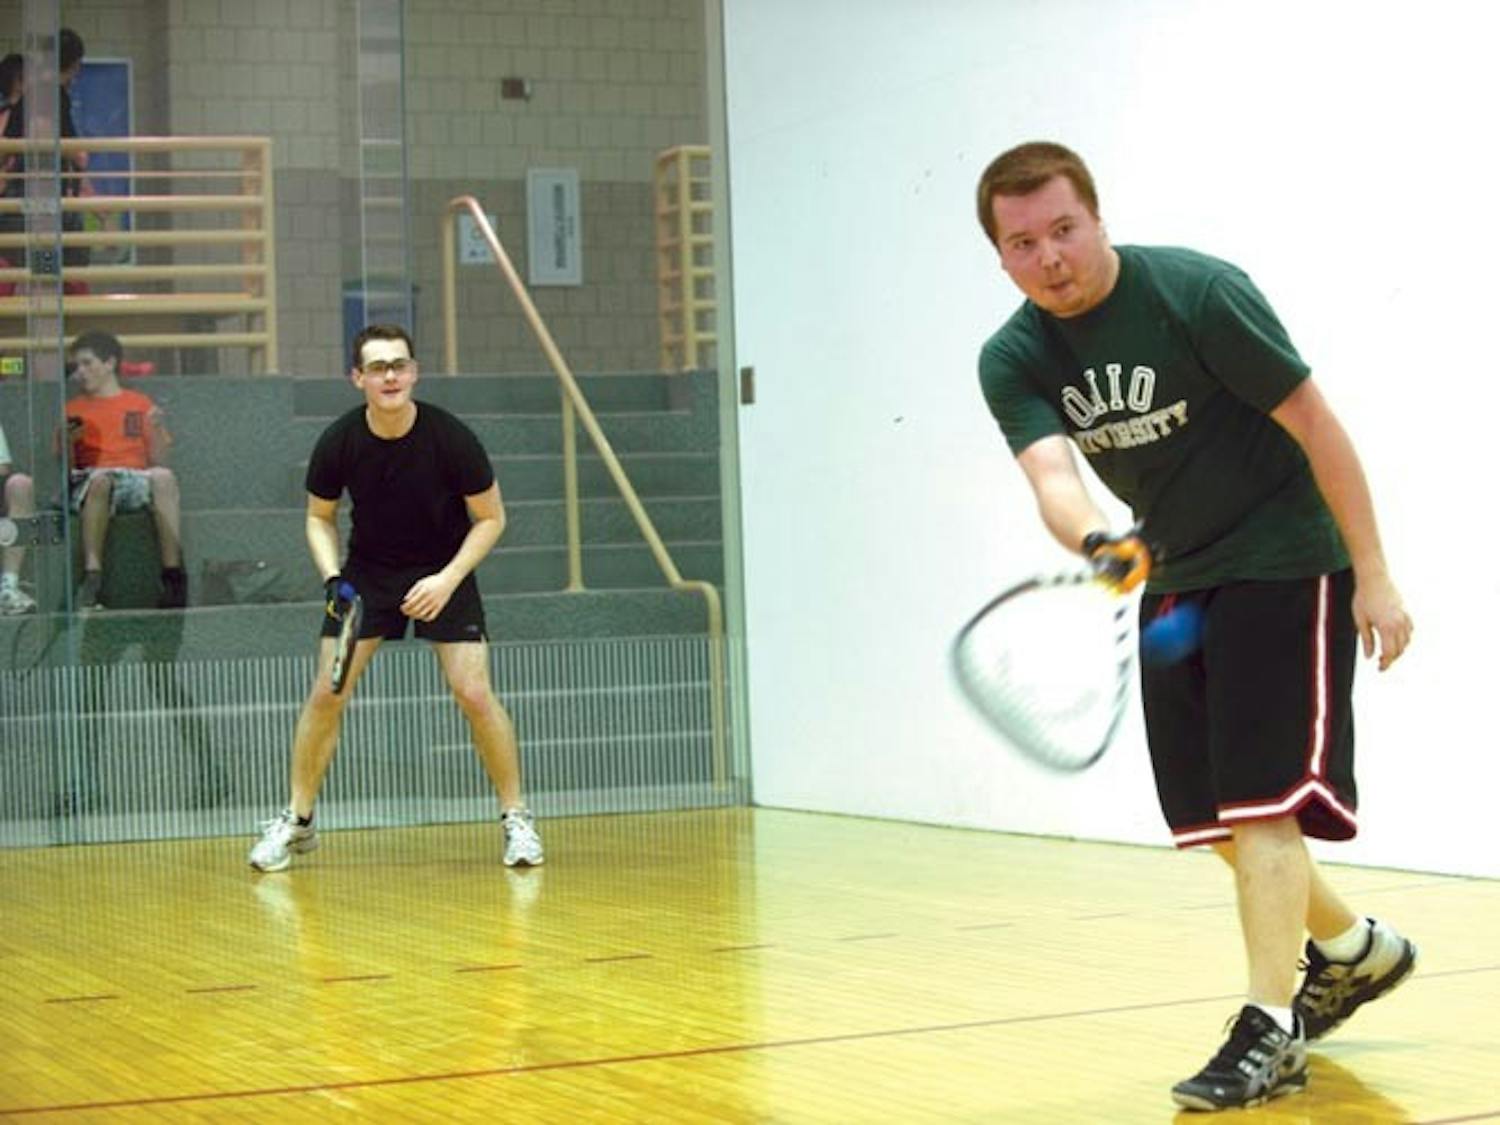 Racquetball bouncing up in popularity among OU students  